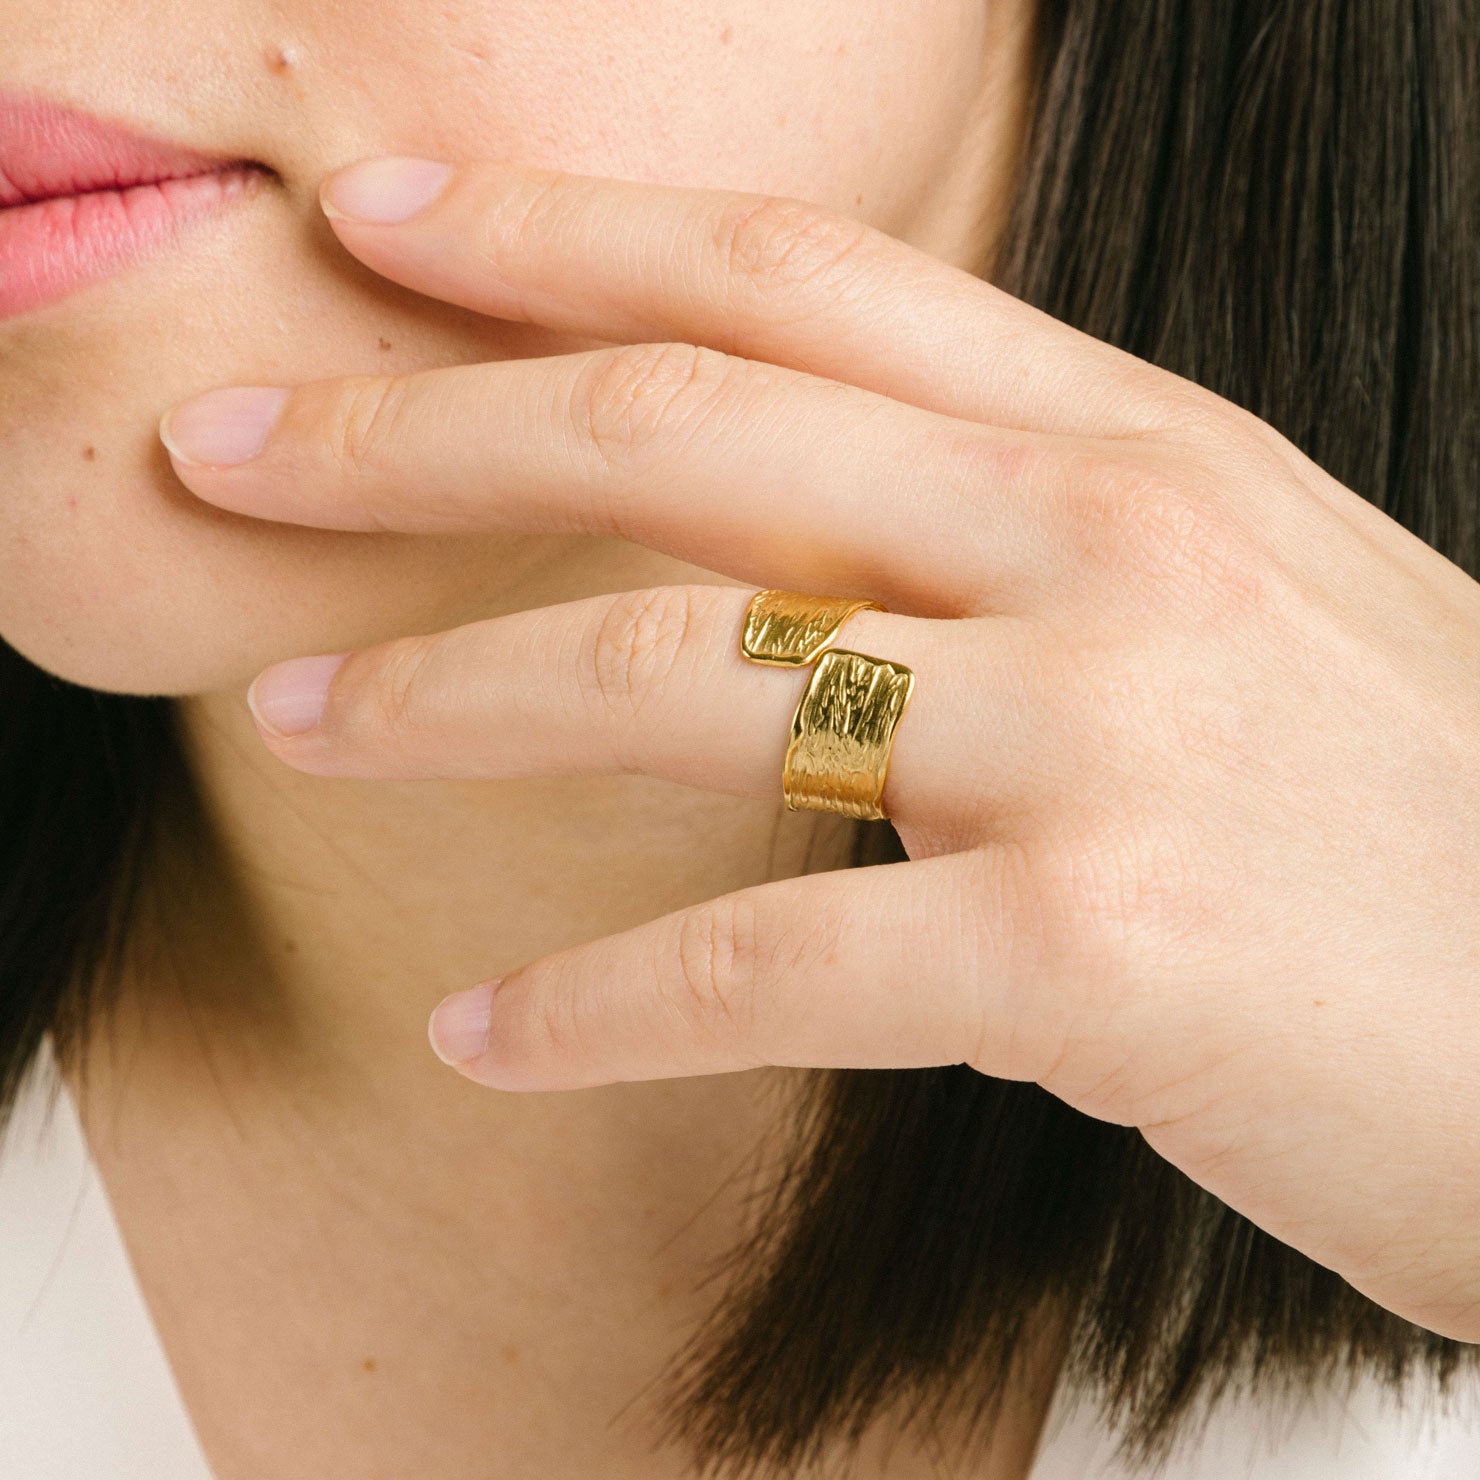 A model wearing the Textured Curl Ring in Gold is adjustable between sizes 7-10, crafted using 14K Gold Plated Stainless Steel for durability and resistance to tarnish, water, and lead, nickel, and cadmium. Please note that only one ring is included.